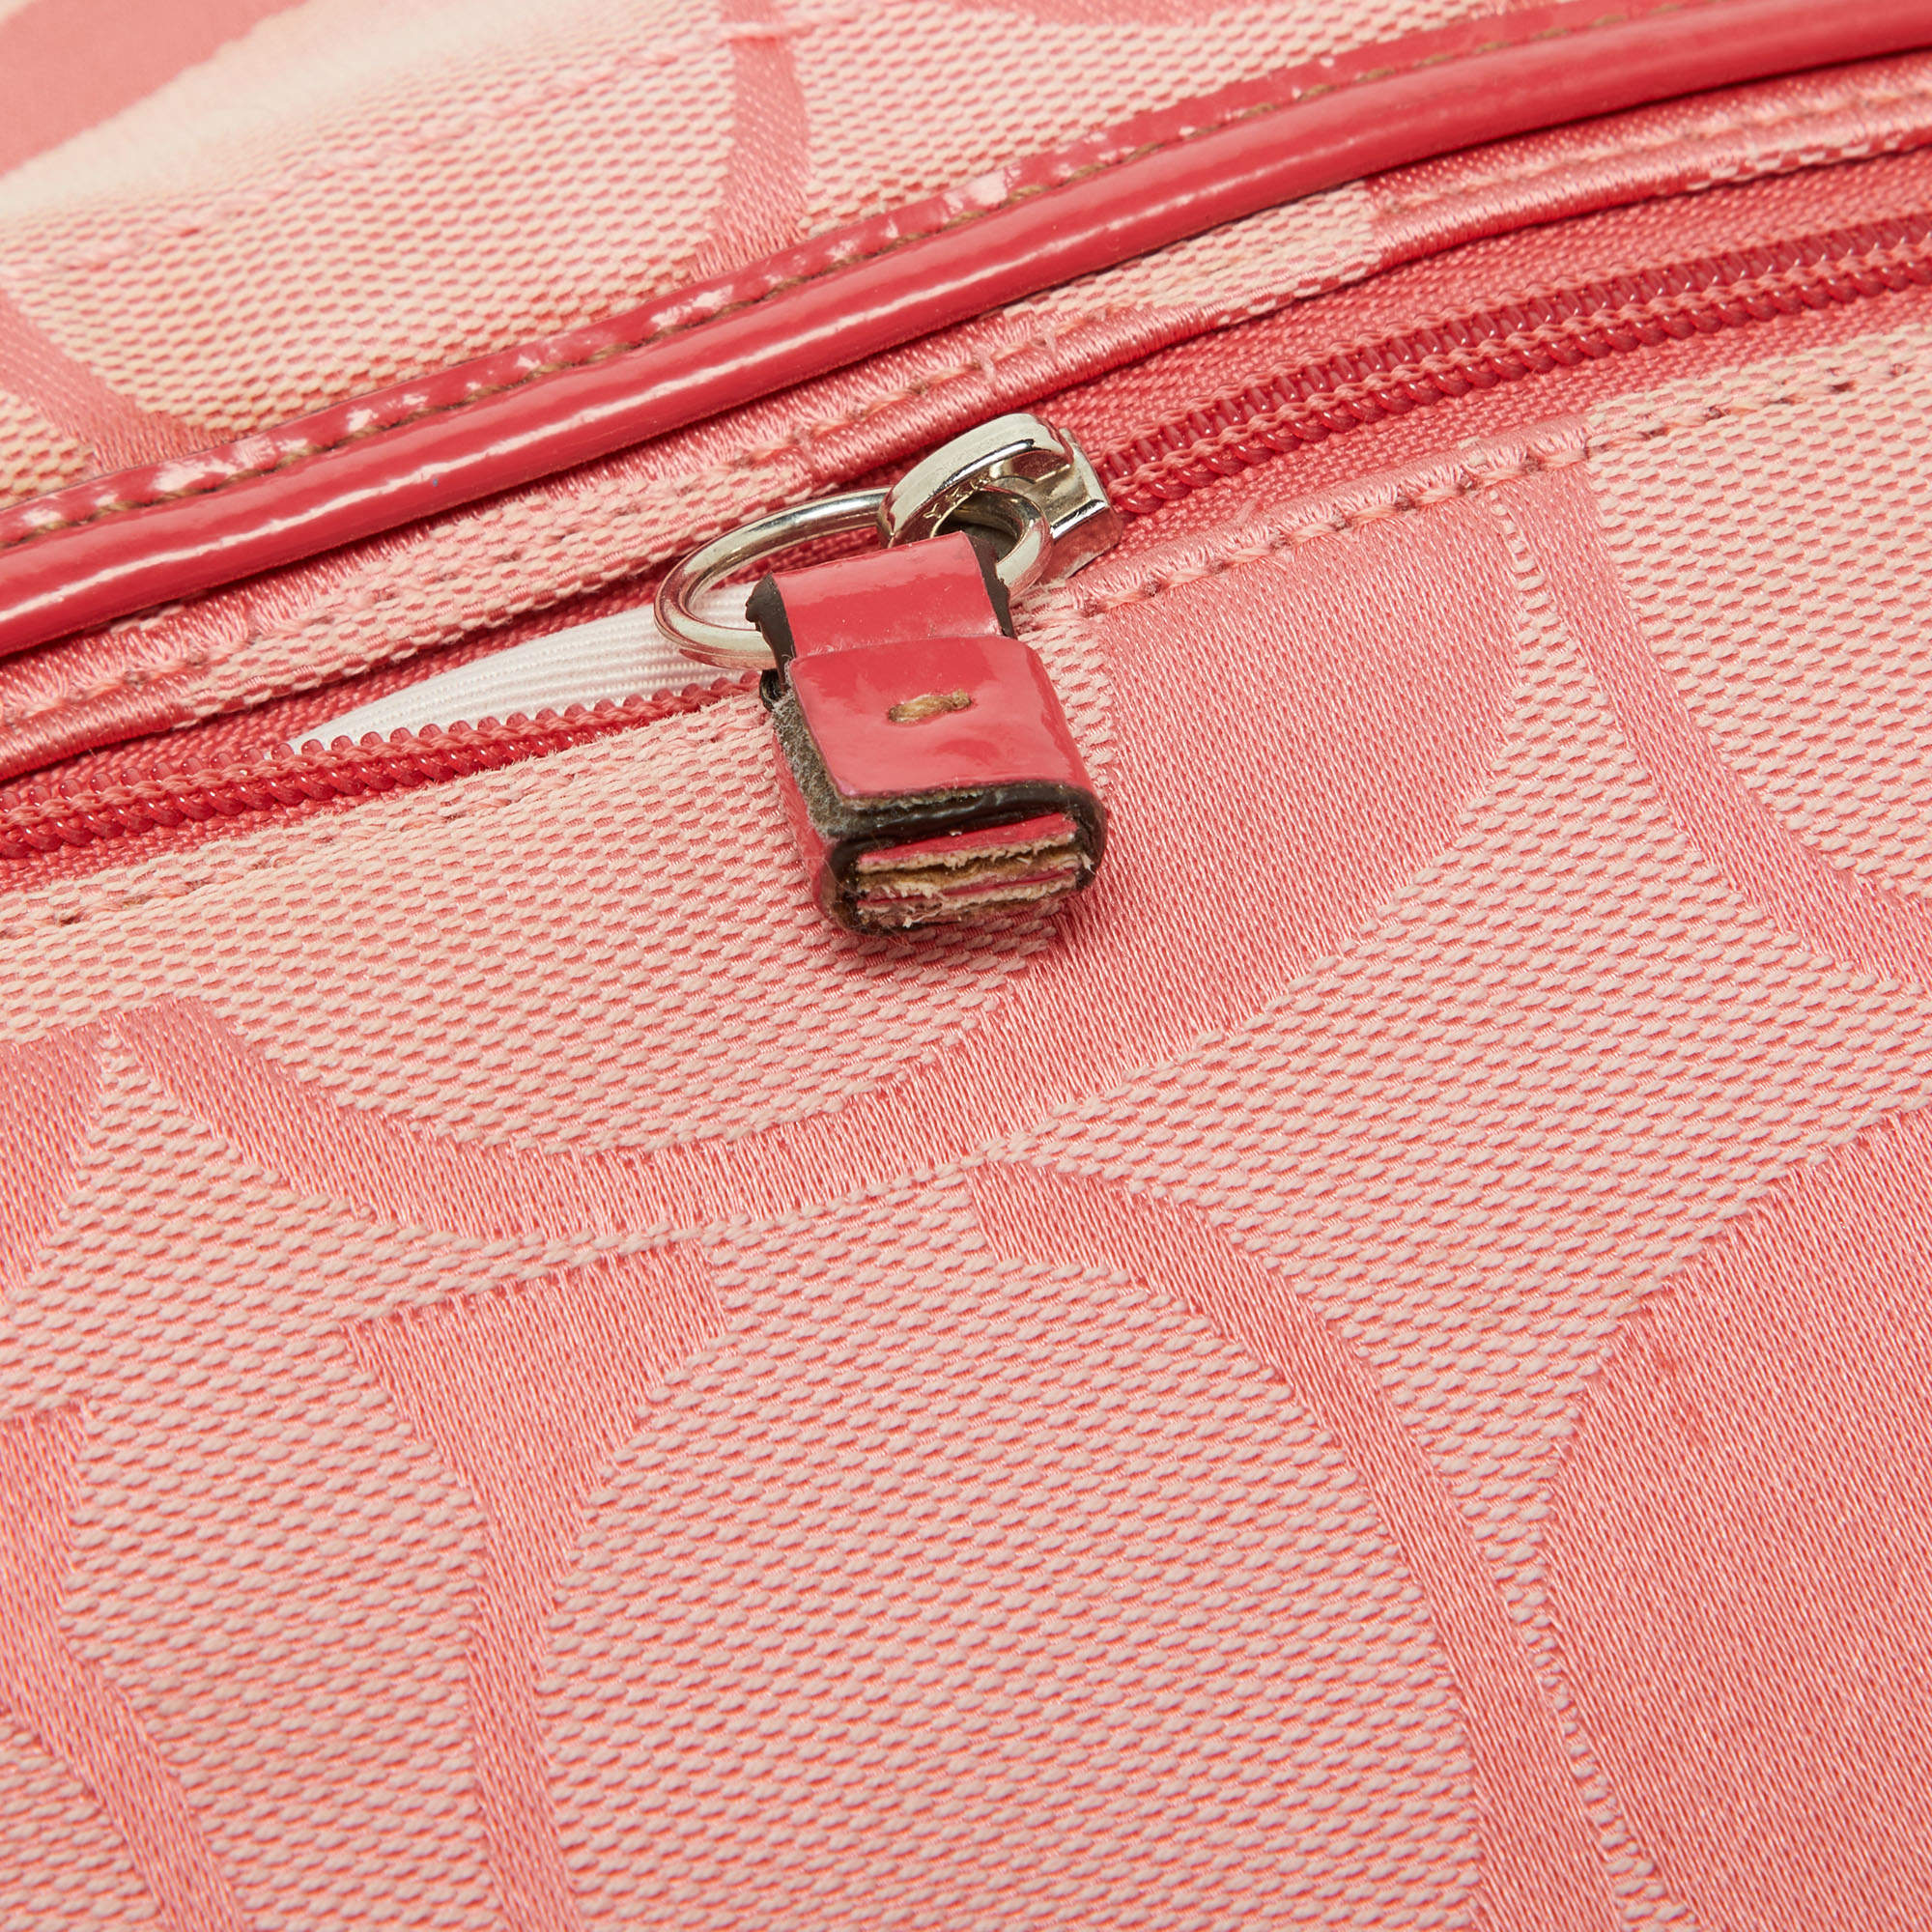 Vintage Pink Coach Purse. Pink Signature Coach Bag. Pink Cloth and